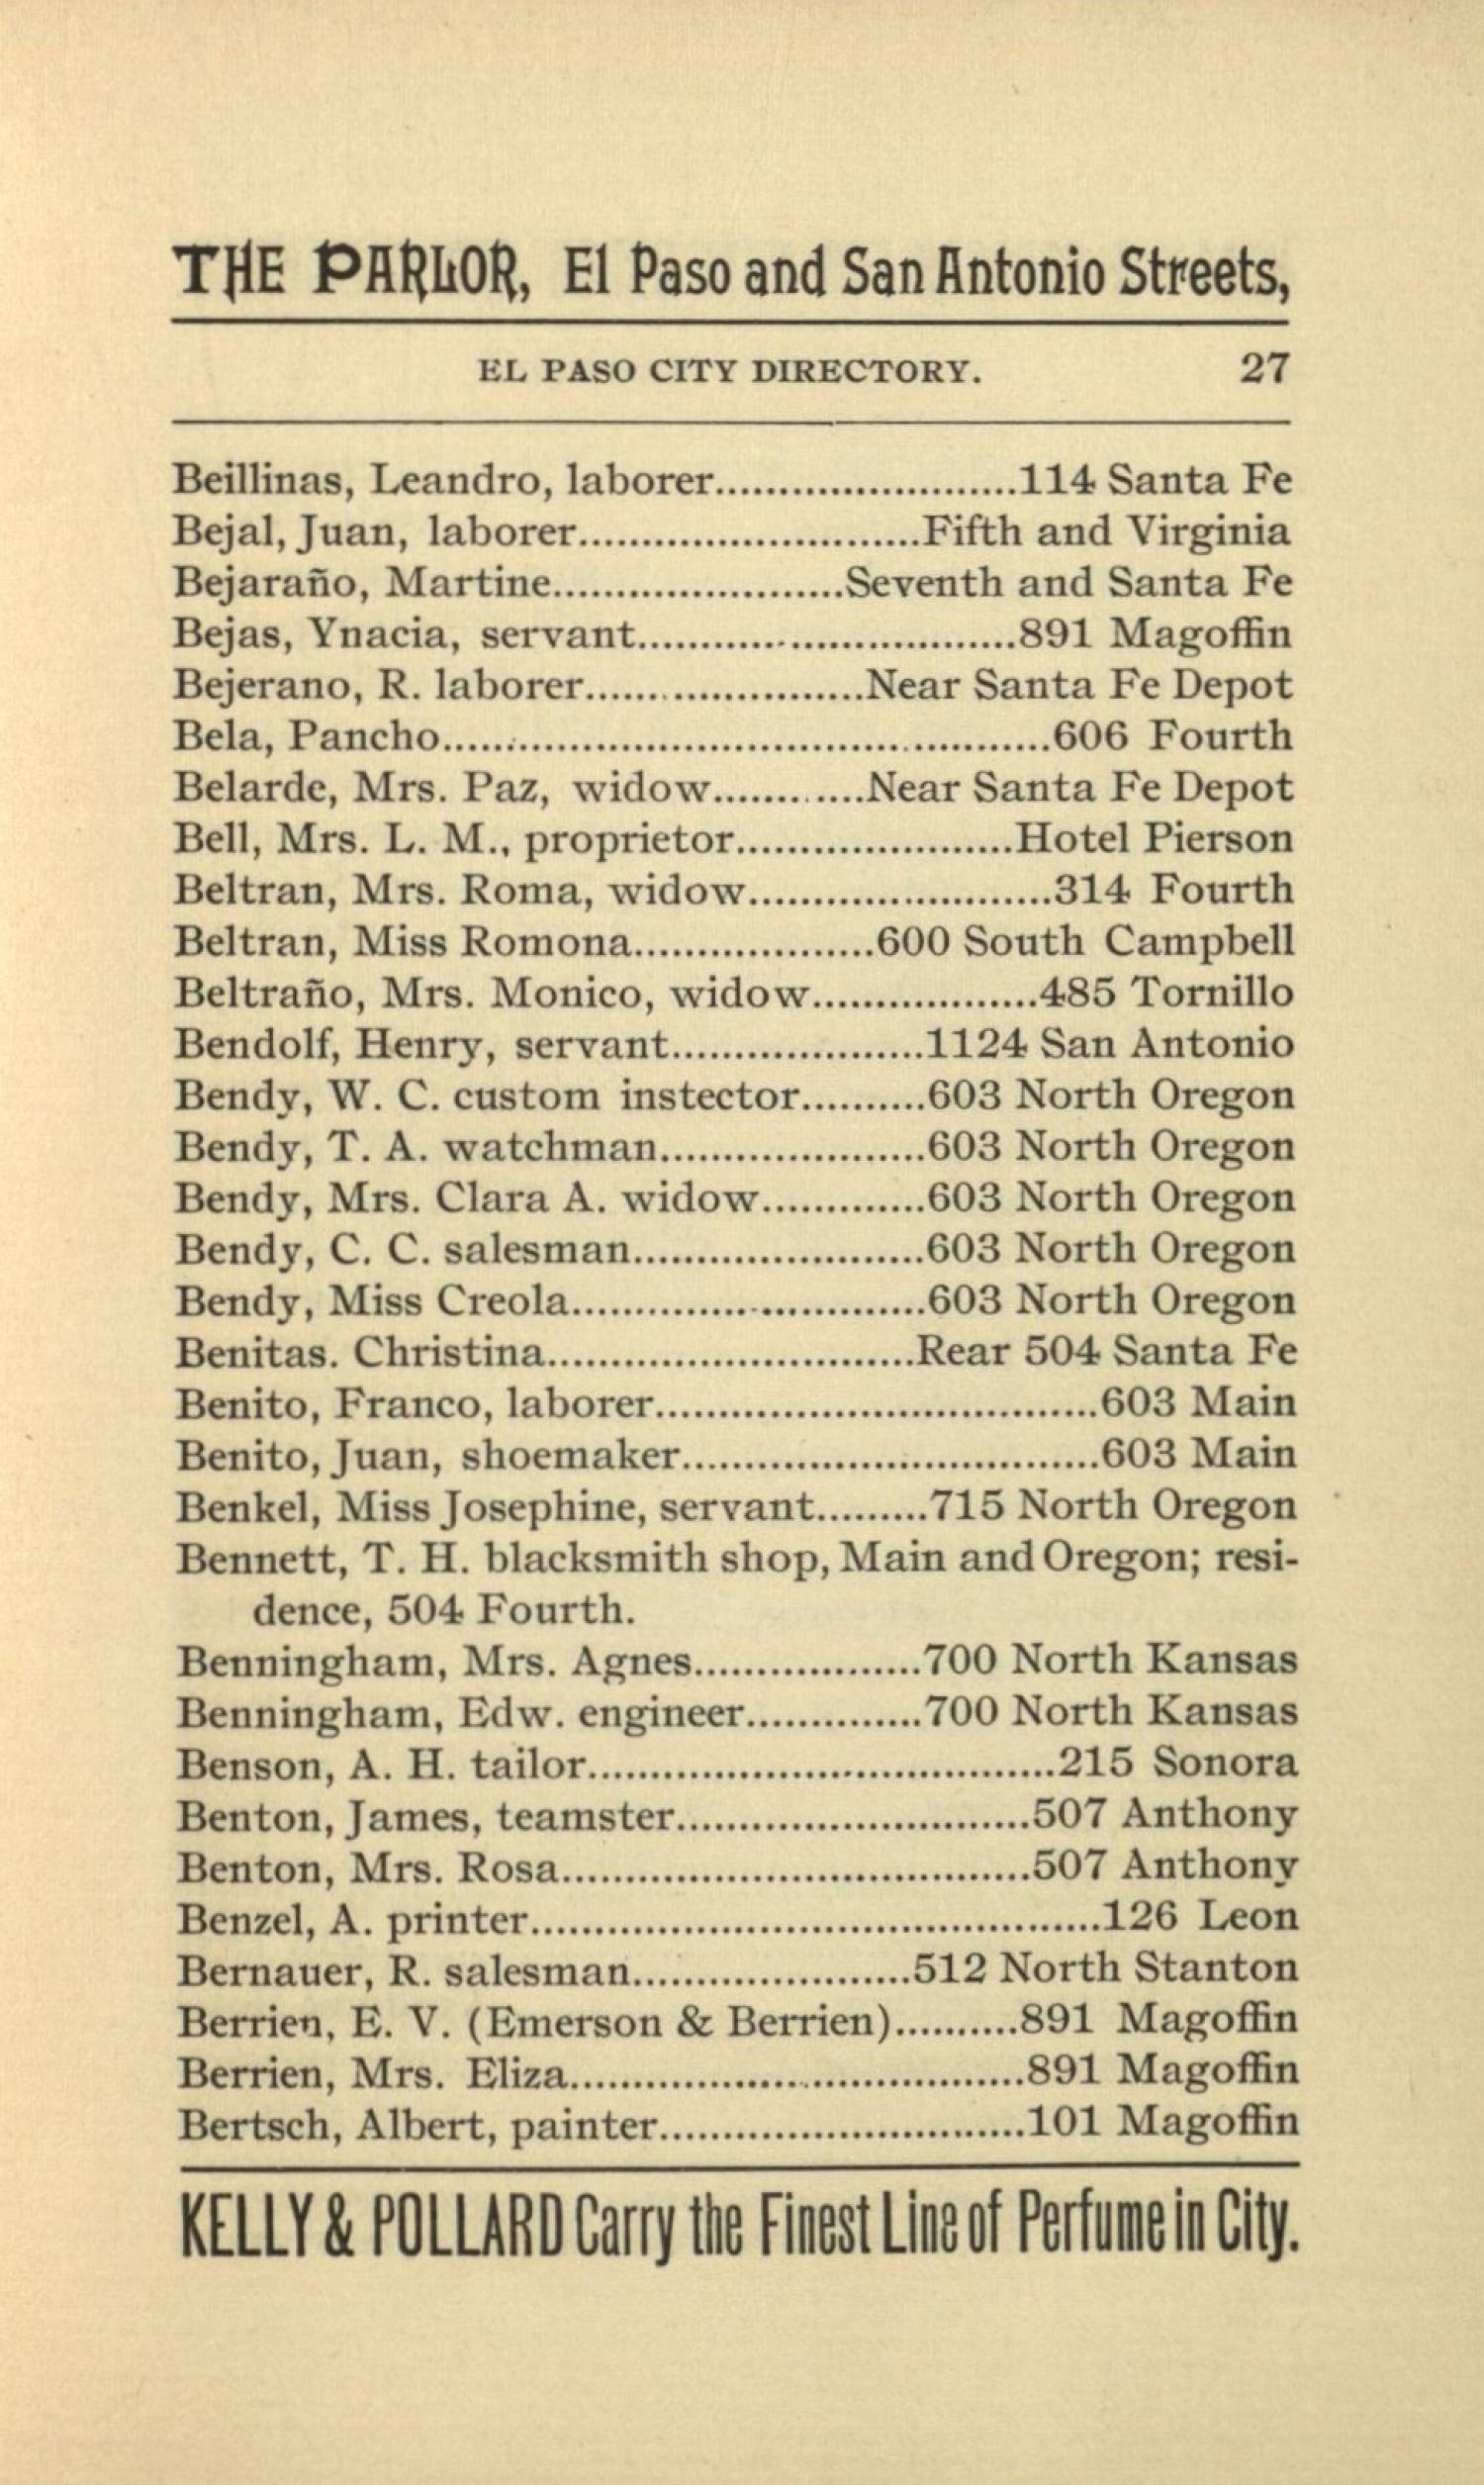 El Paso City Directory for the Years 1895 - 1896
                                                
                                                    27
                                                